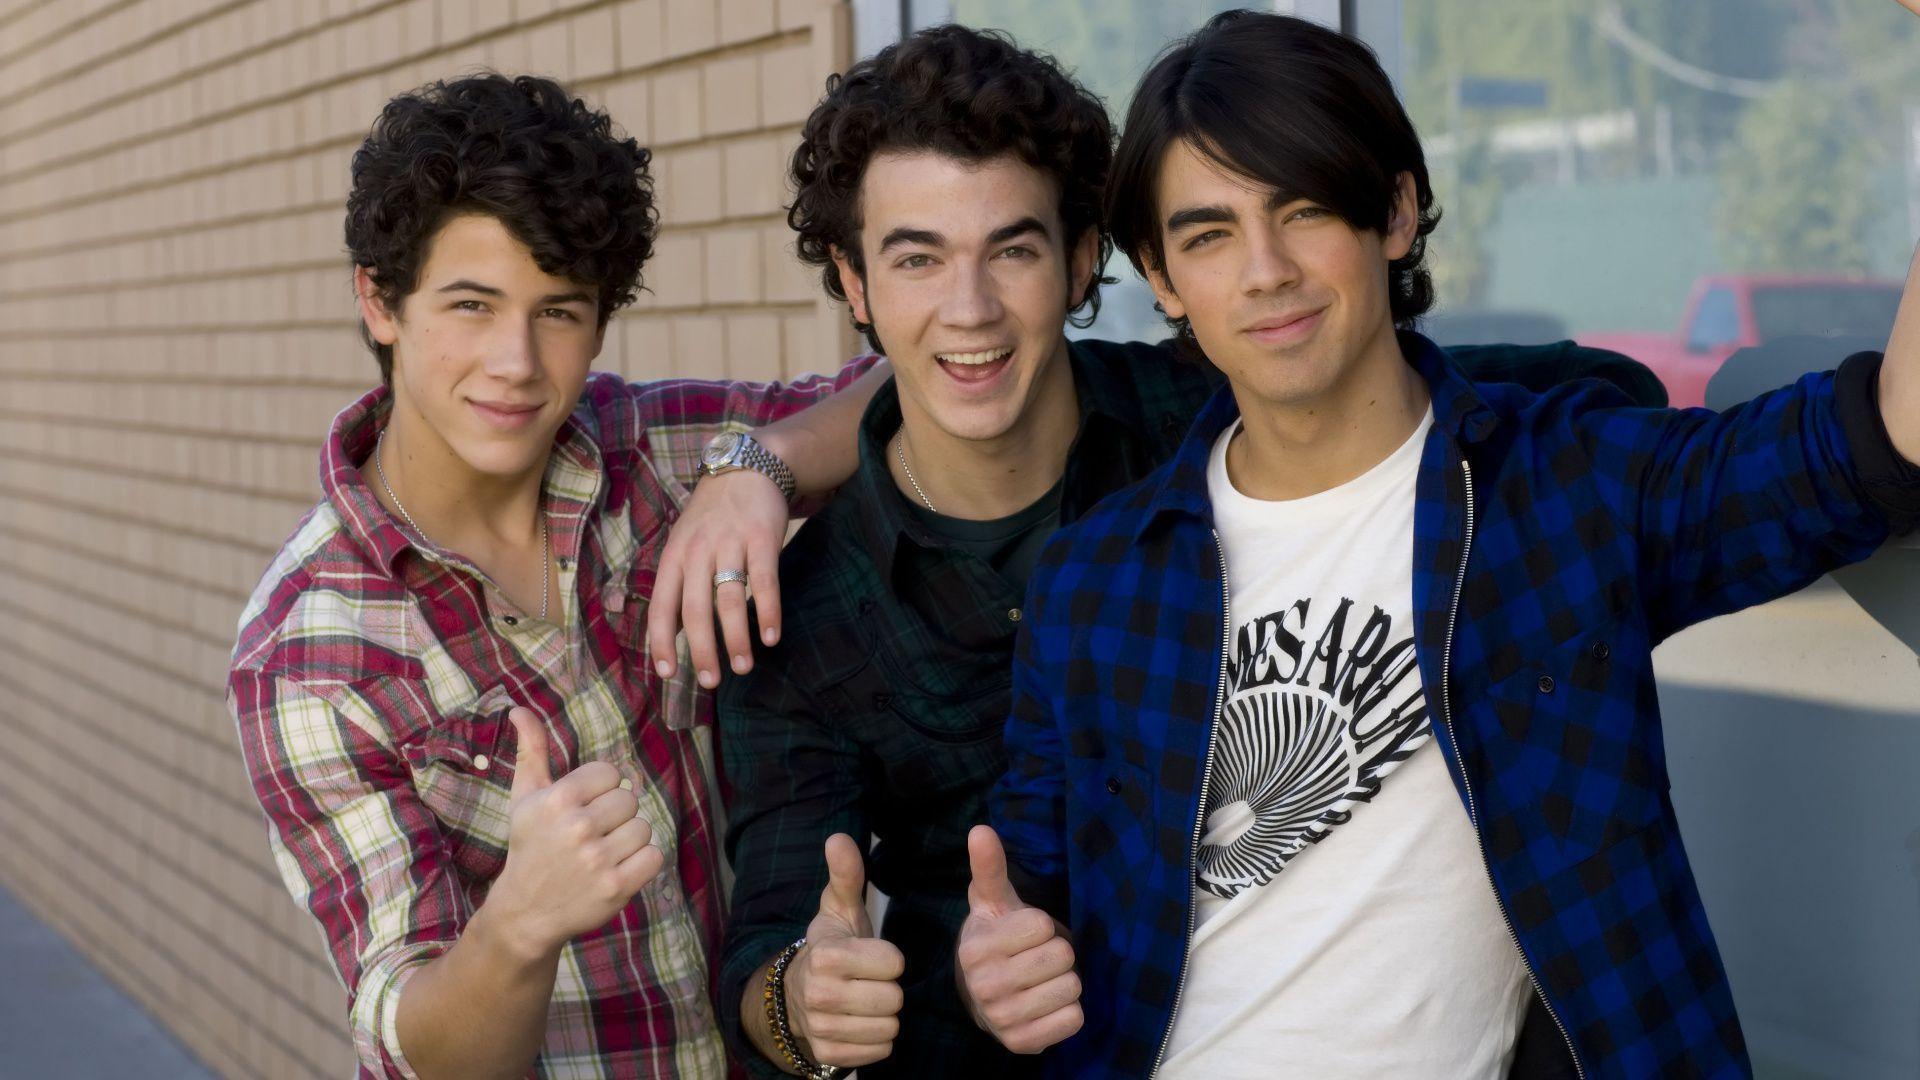 Jonas Brothers Wallpaper Image Photo Picture Background